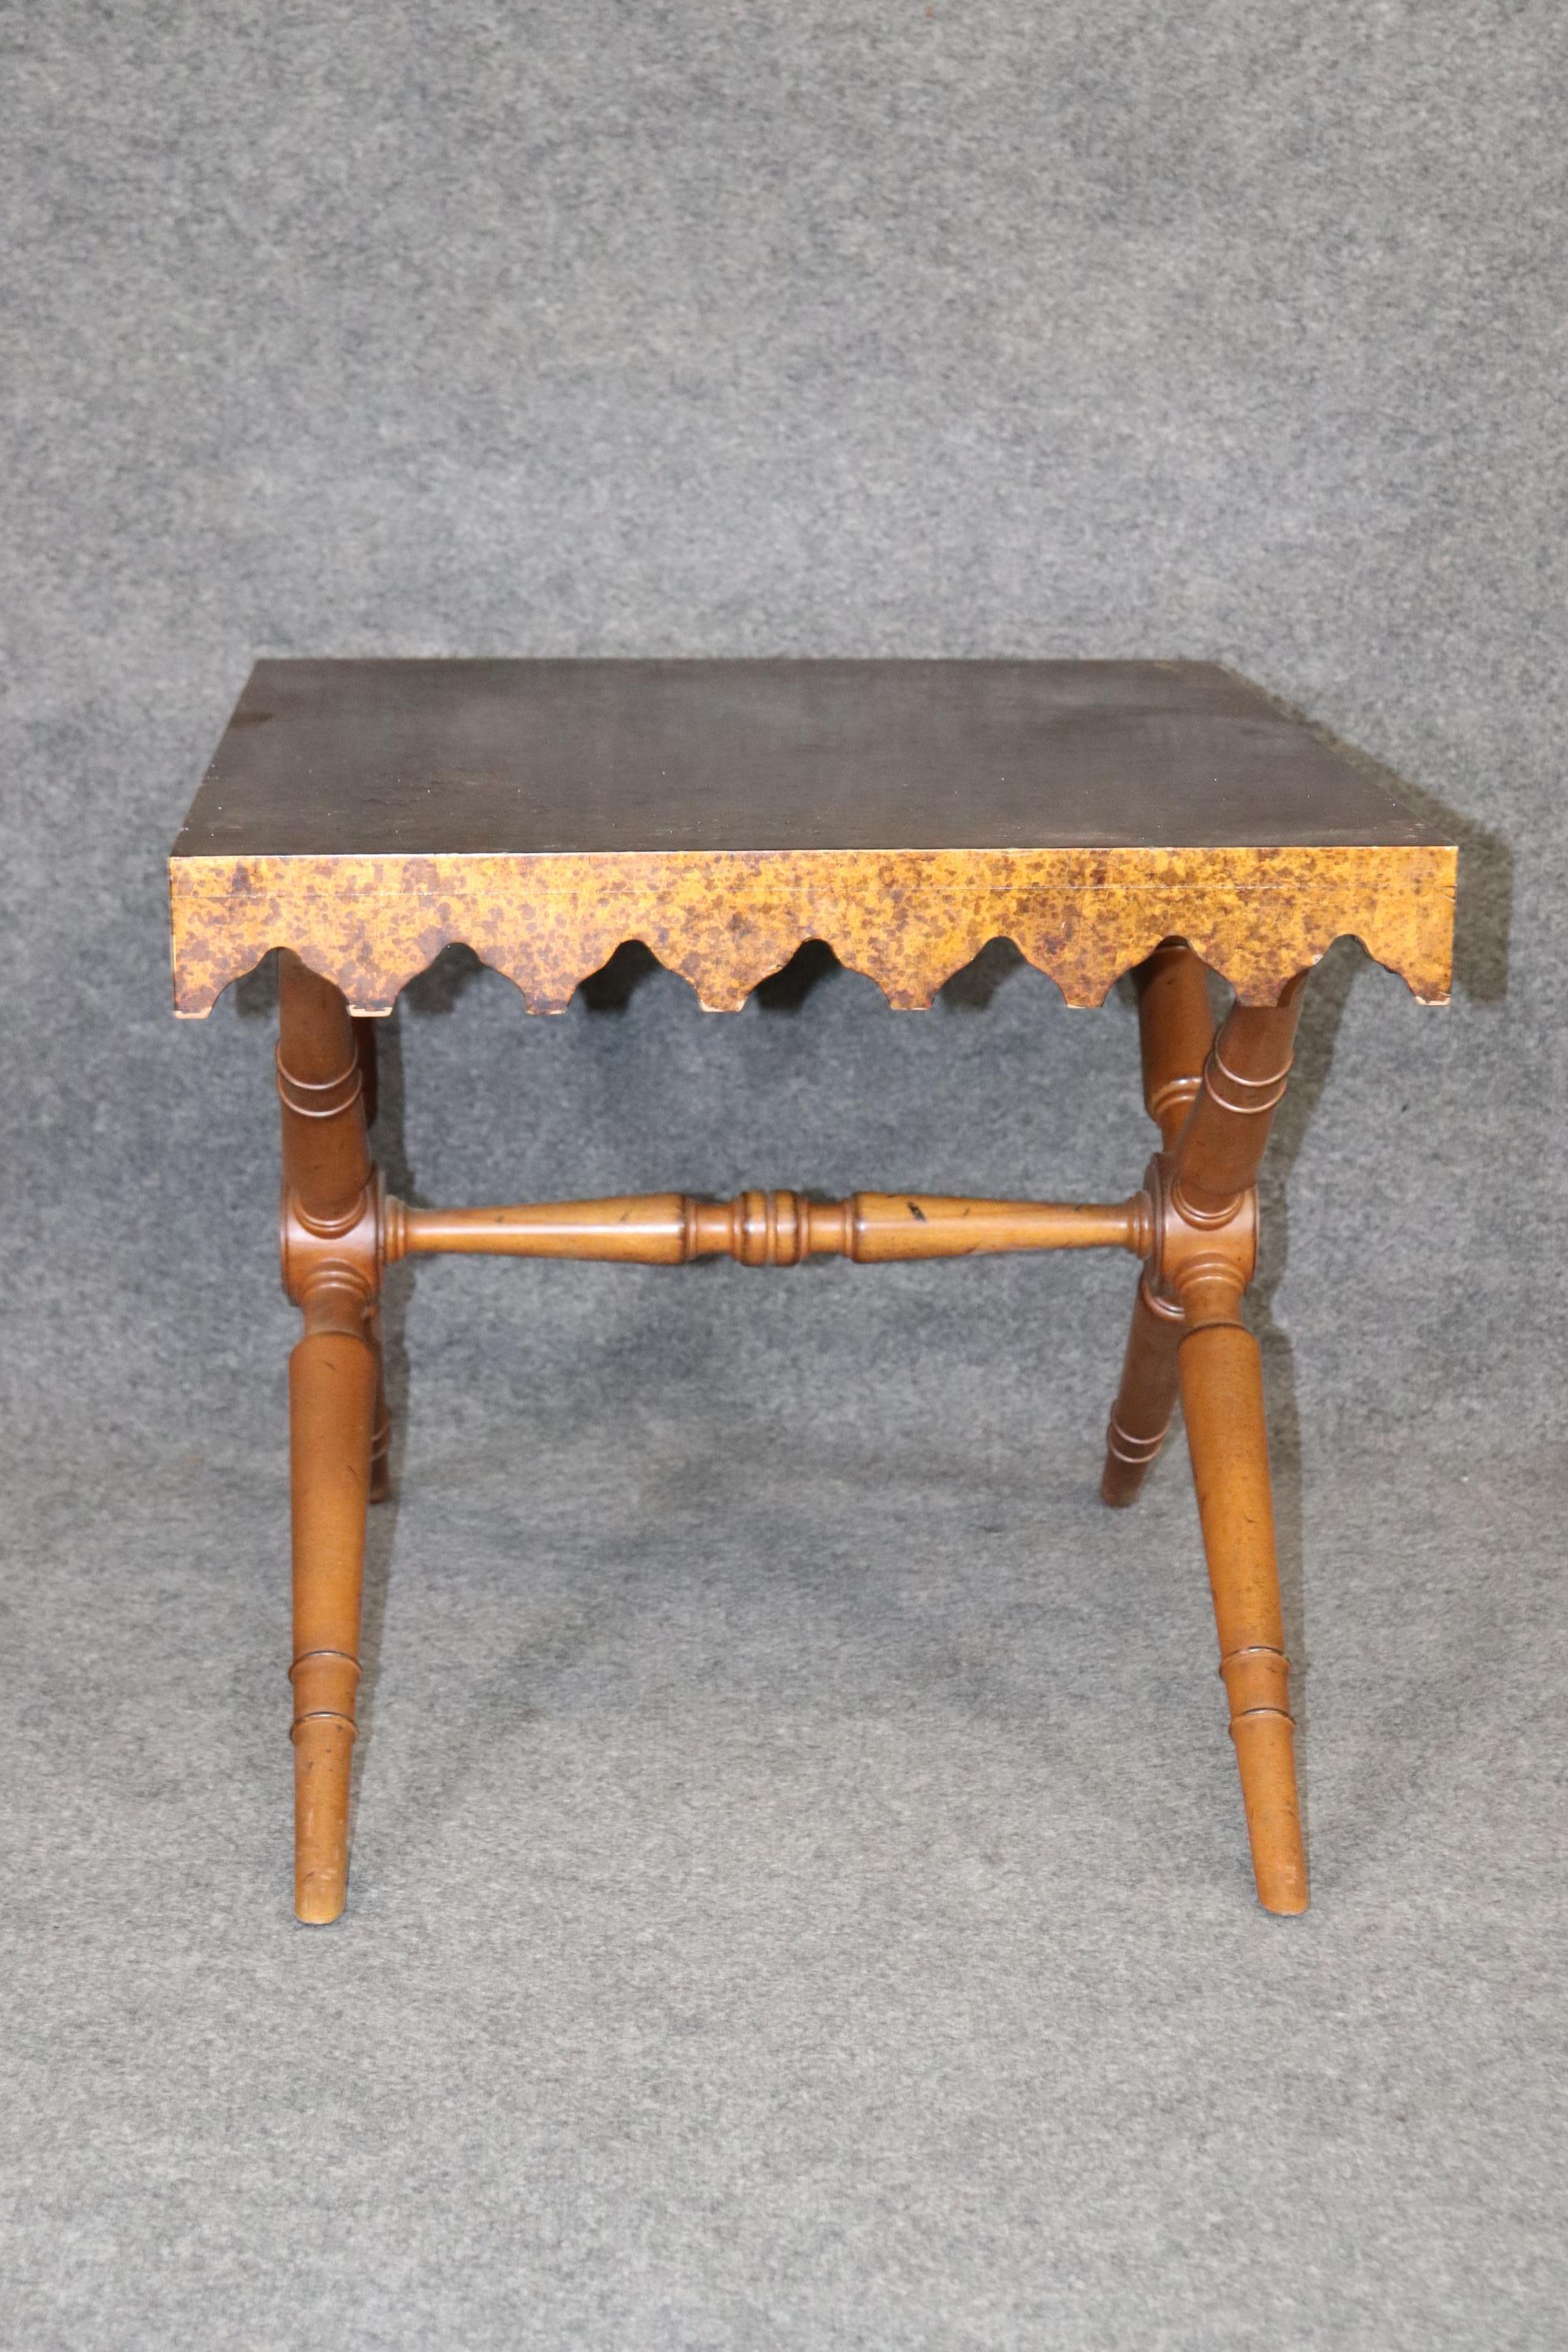 Faux Tortoise Shell Paint Decorated End Table Attributed to Maison Jansen In Good Condition For Sale In Swedesboro, NJ